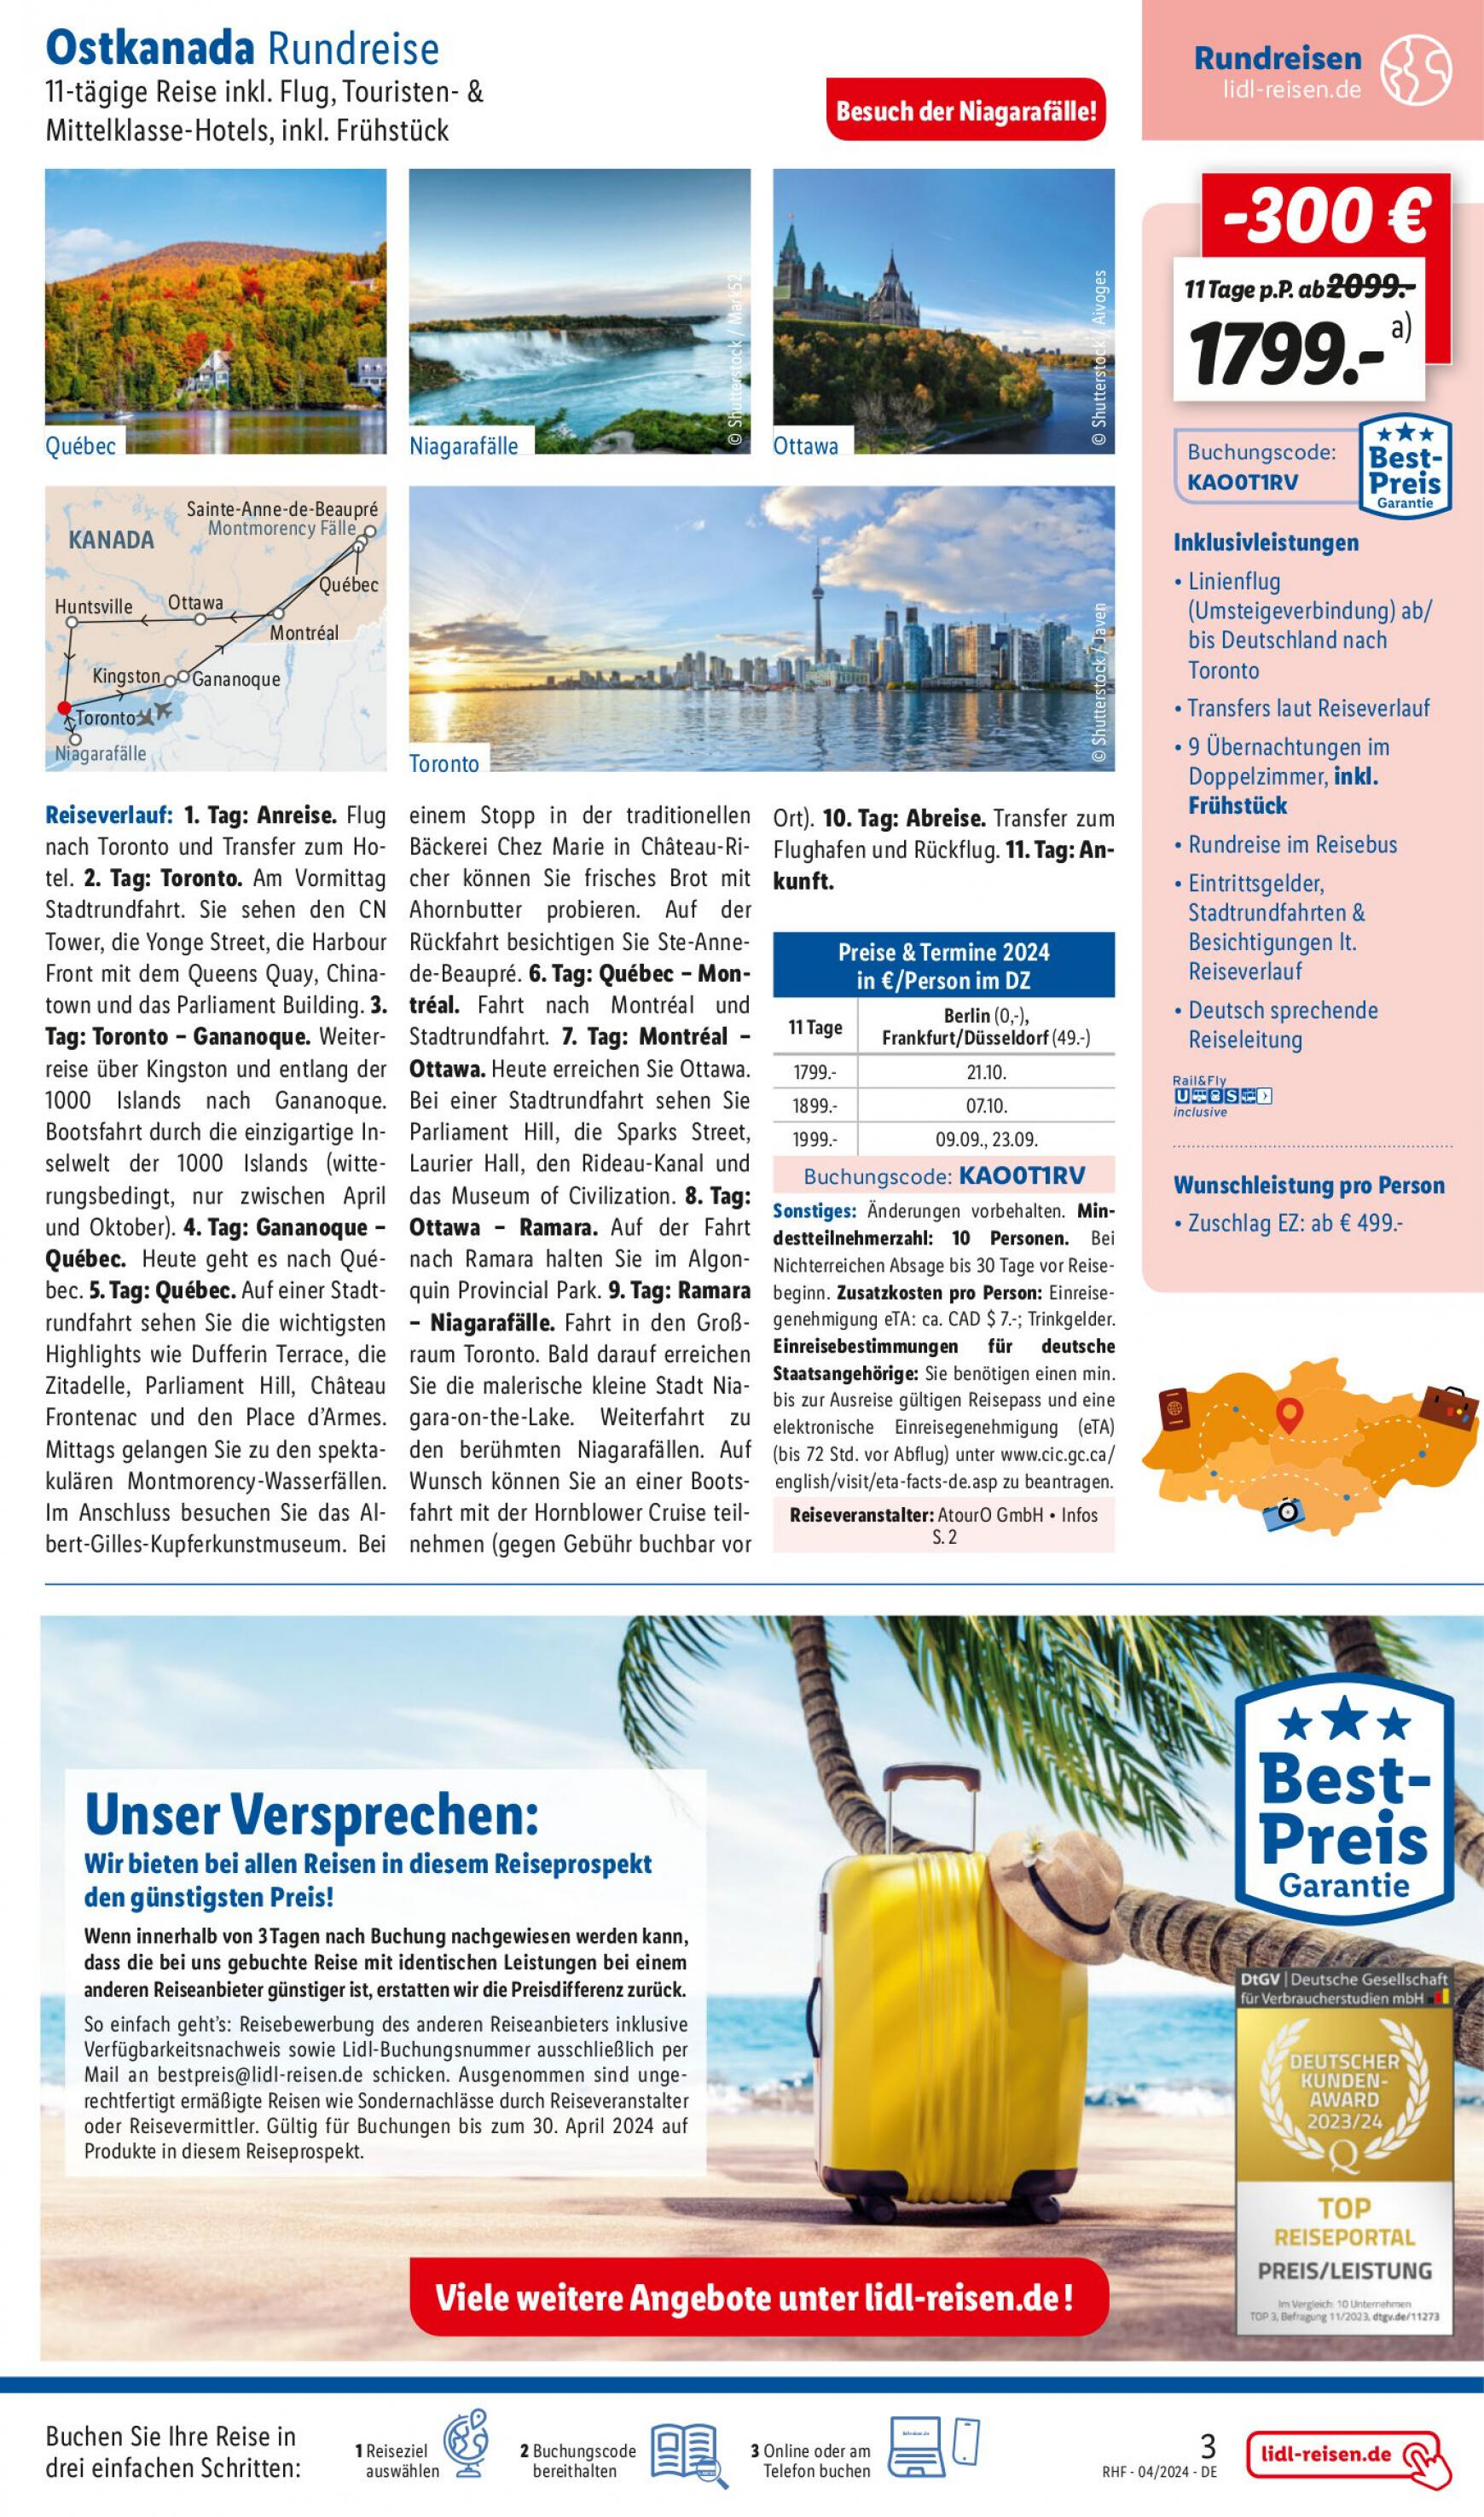 lidl - Flyer Lidl - April Reise-Highlights aktuell 27.03. - 30.04. - page: 3